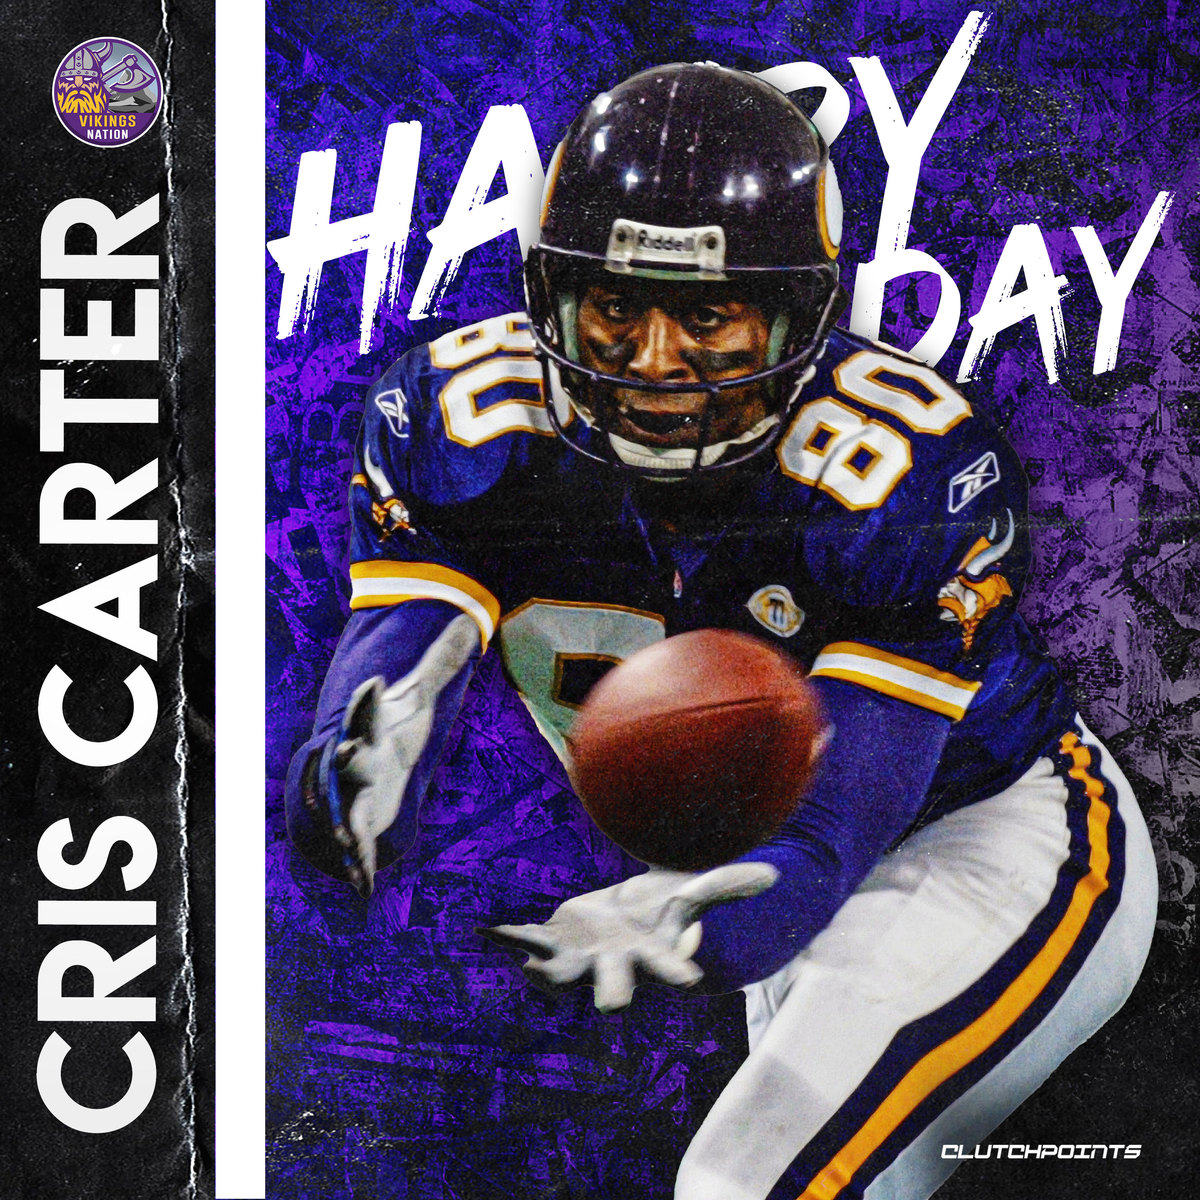 Join Vikings Nation in greeting Hall of Famer and 8x Pro Bowler, Cris Carter, a happy 56th birthday!  